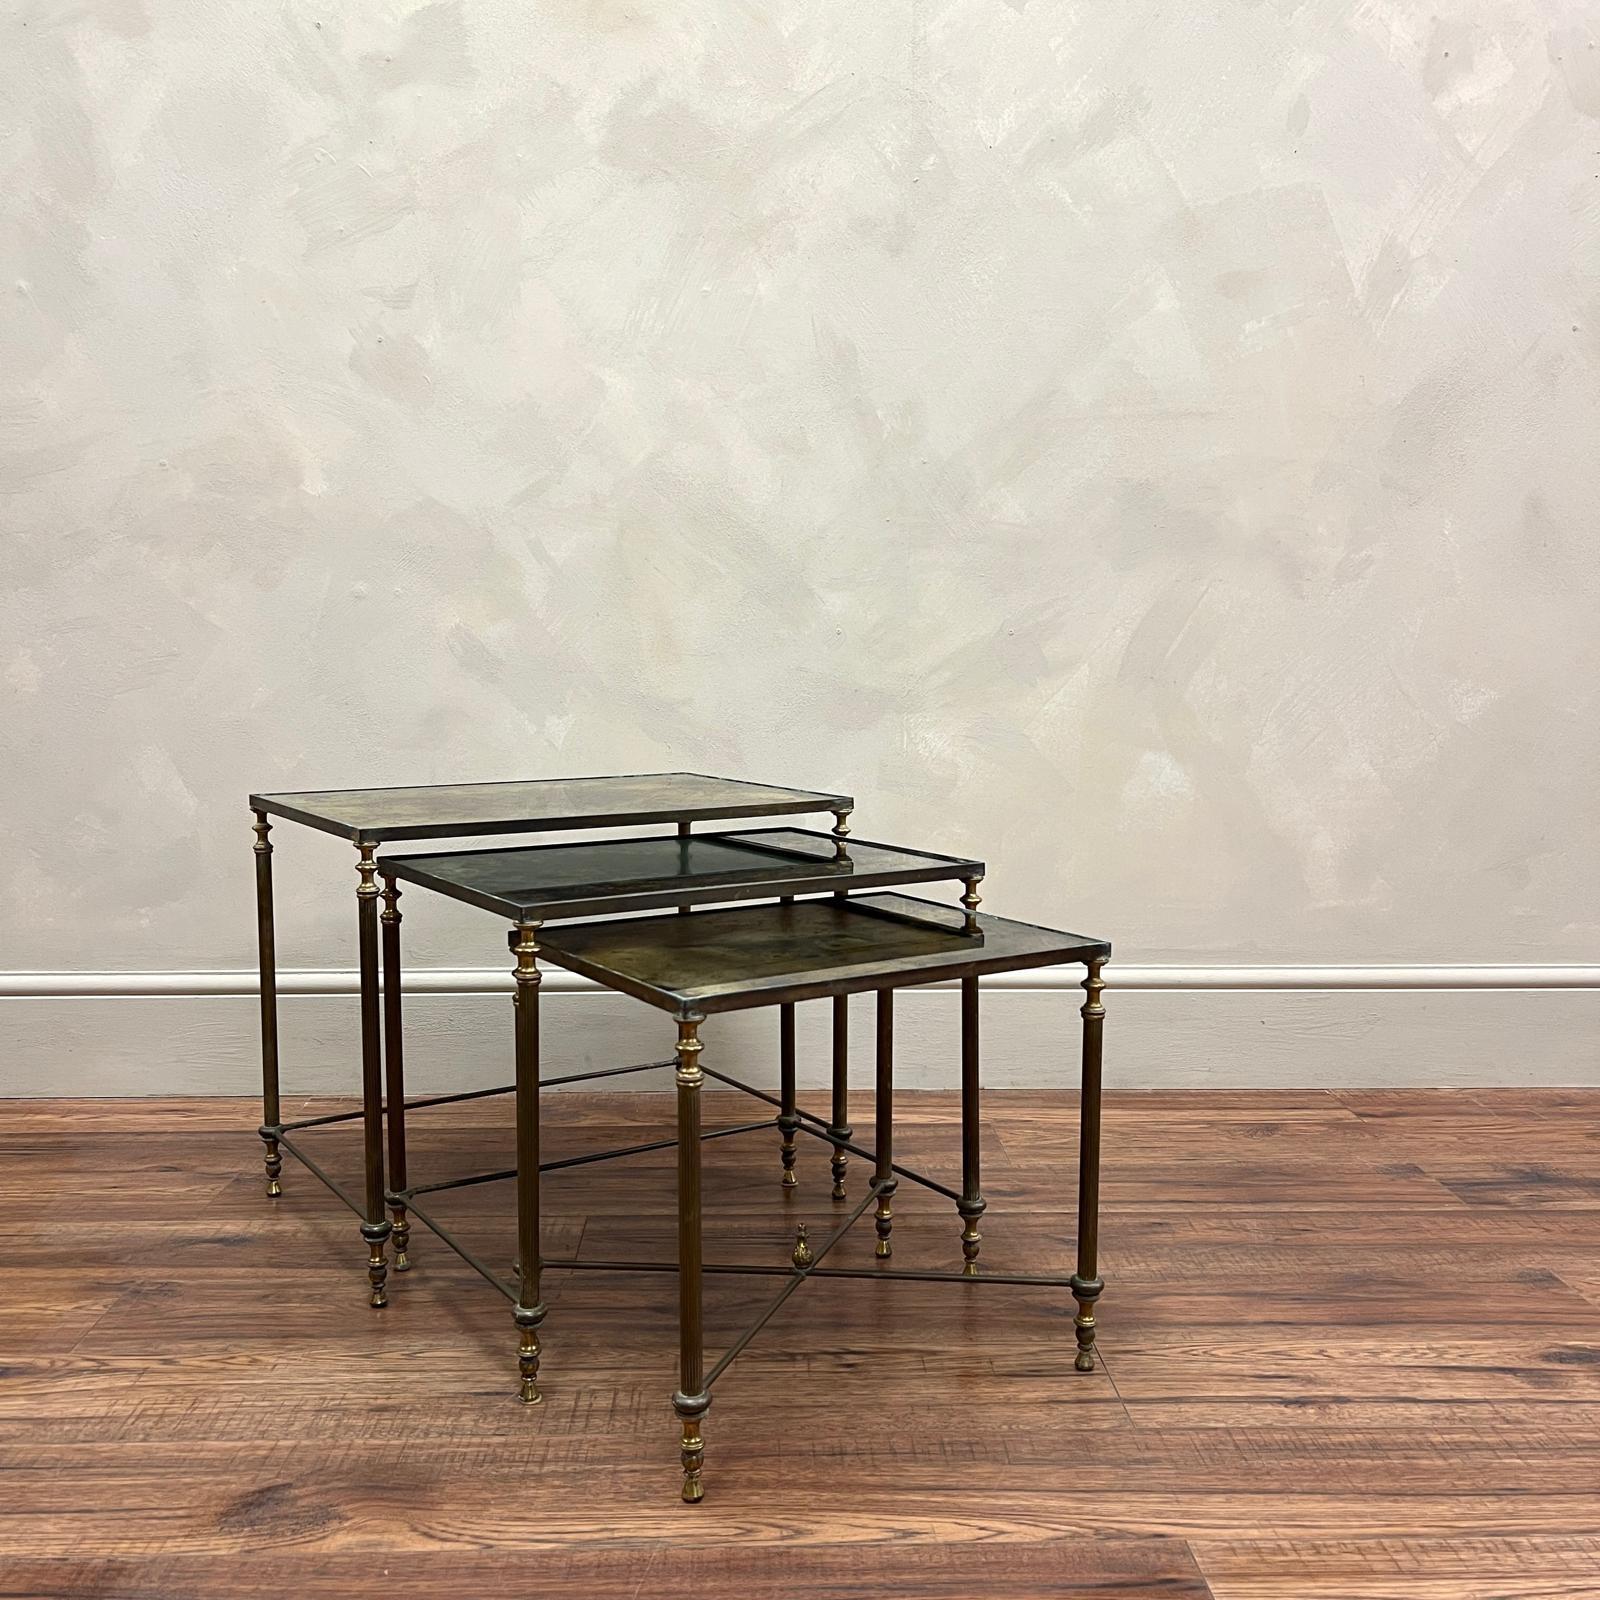 Nest of 3 brass, graduating side tables by Maison Baguès , rich eglomise glass.
Reeded legs sitting on detailed brass feet.

France, circa 1940.

Largest 
Height - 45 cm
Width - 54.5 cm
Depth - 37.5 cm

Smallest 
Height - 37 cm
Width - 40.5 cm
Depth